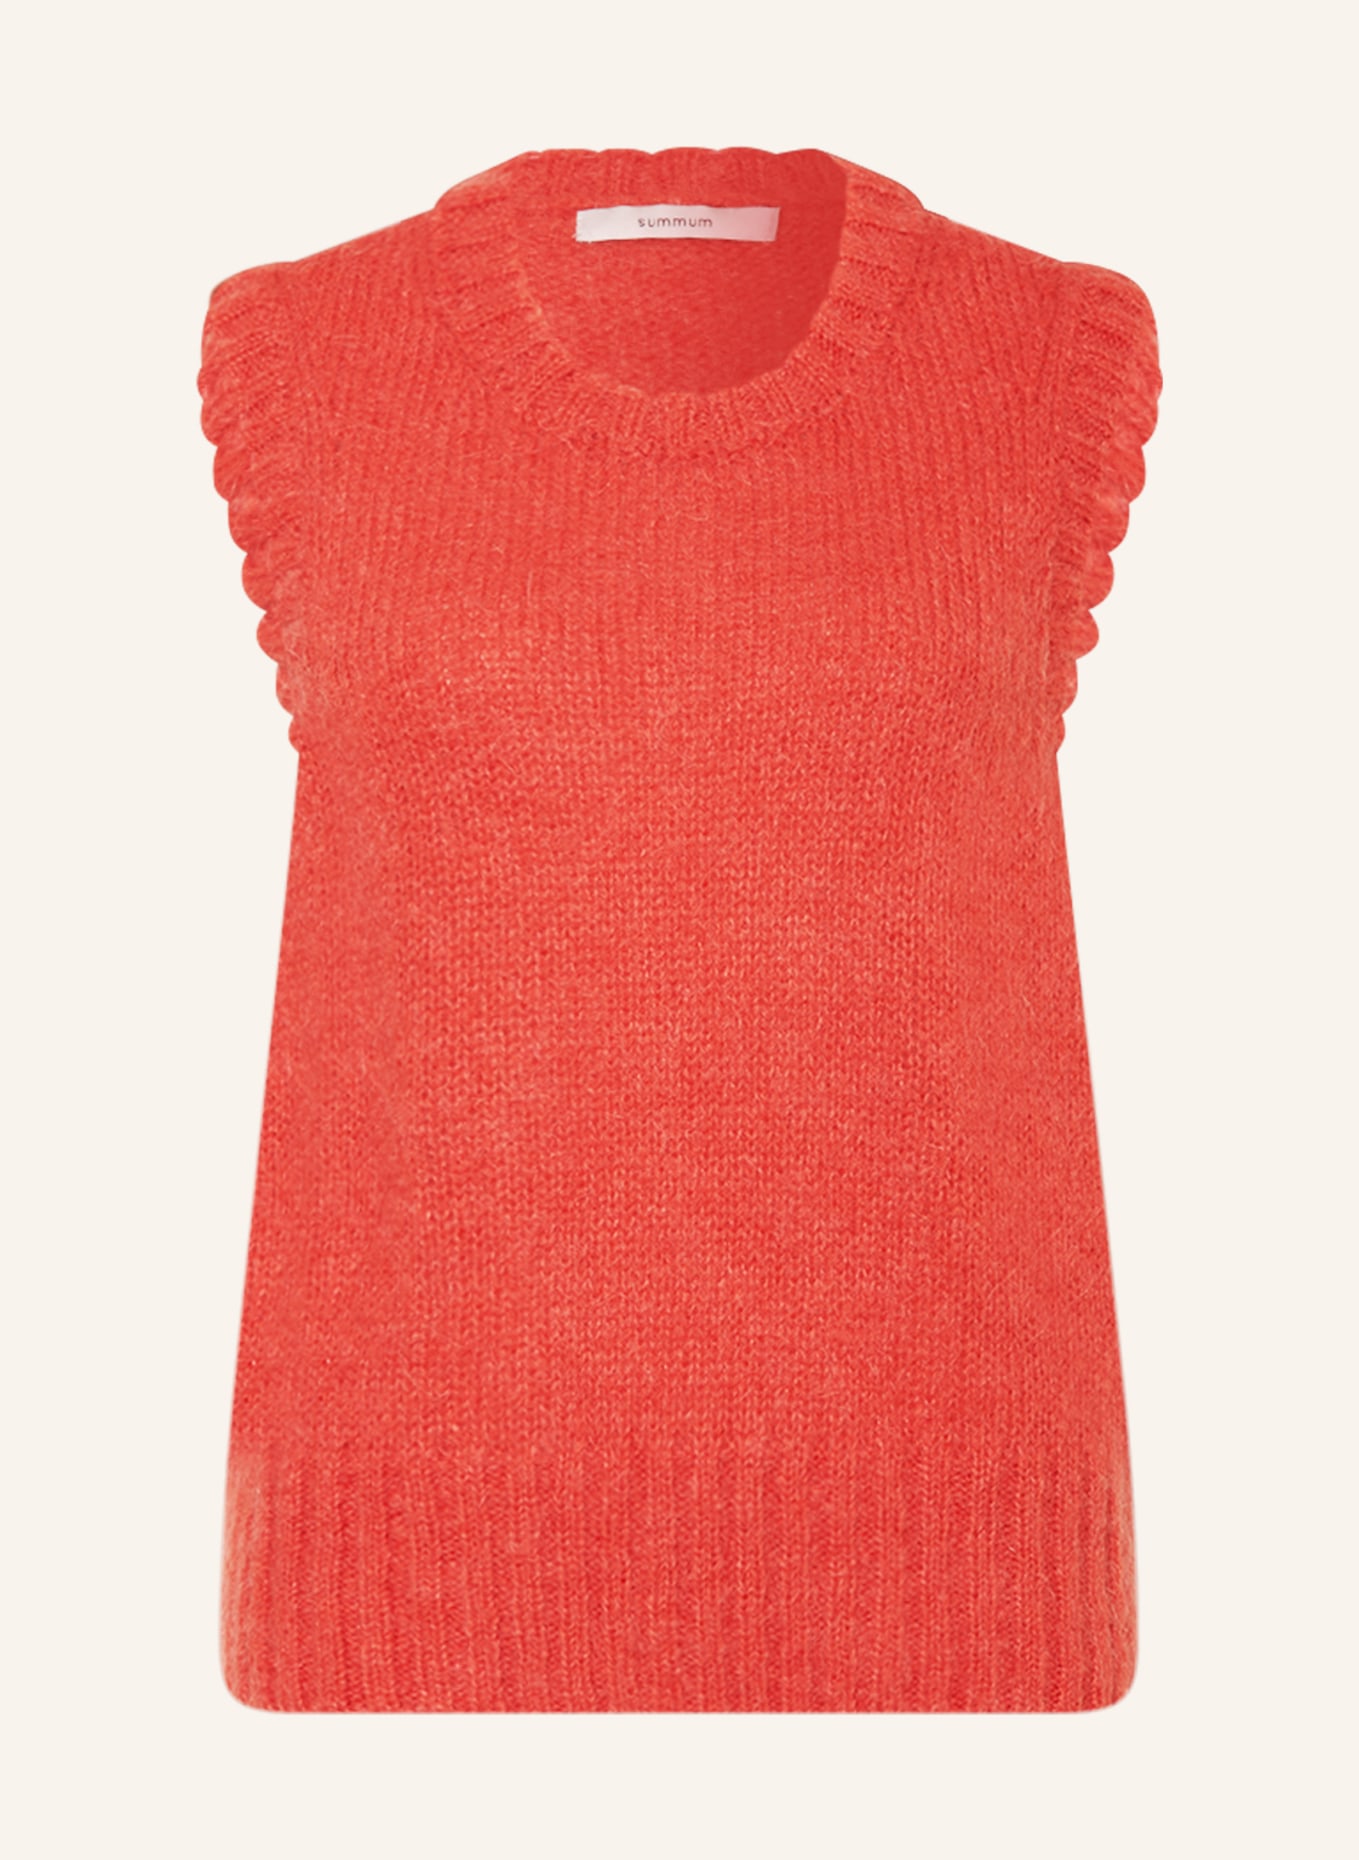 summum woman Sweater vest with mohair, Color: RED (Image 1)